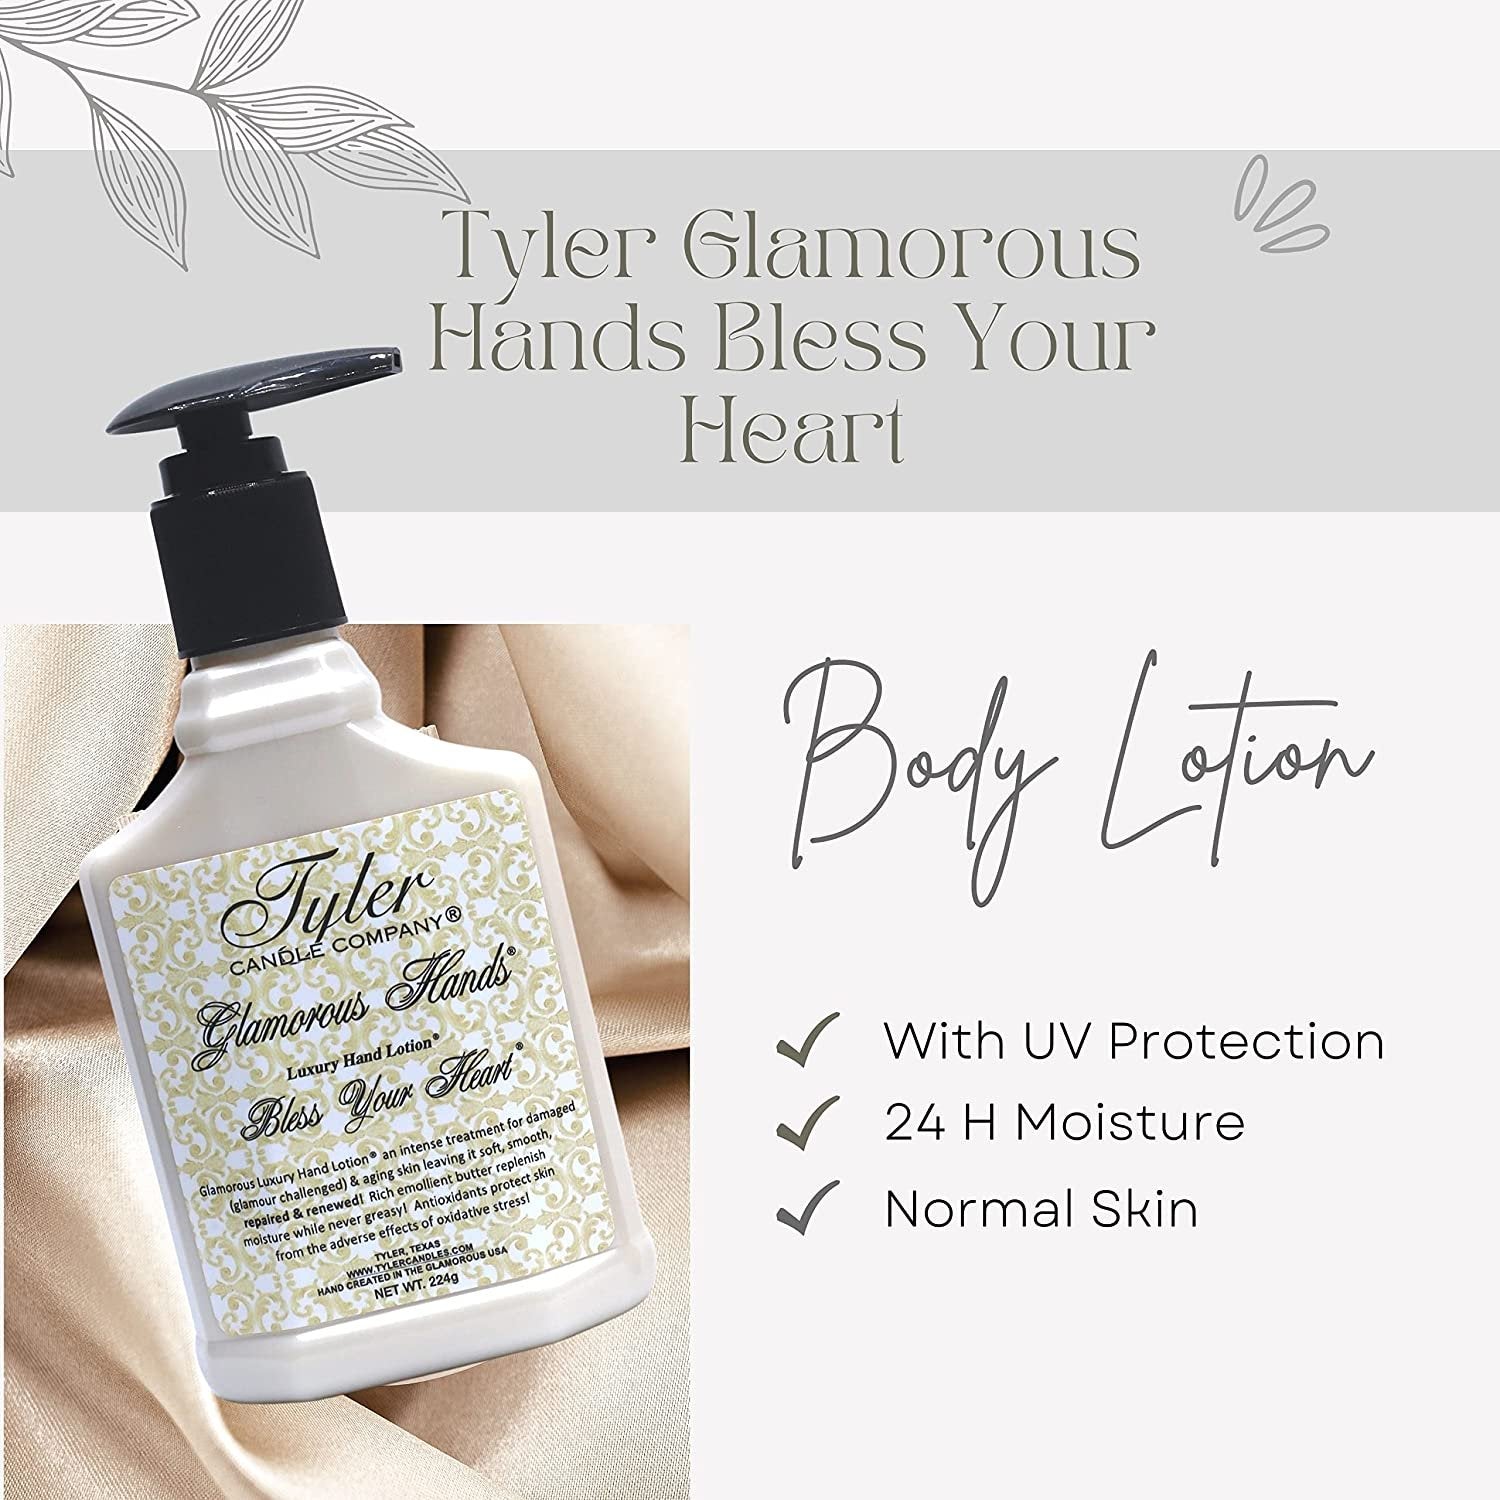 Tyler Candle Company Bless Your Heart Glamorous Hand Wash and Hand Lotion Gift Set - Pack of 2 8 Oz Tyler Bless Your Heart Scented Hand Cream Pump Bottles for Luxury Skin Care with Bonus Keychain